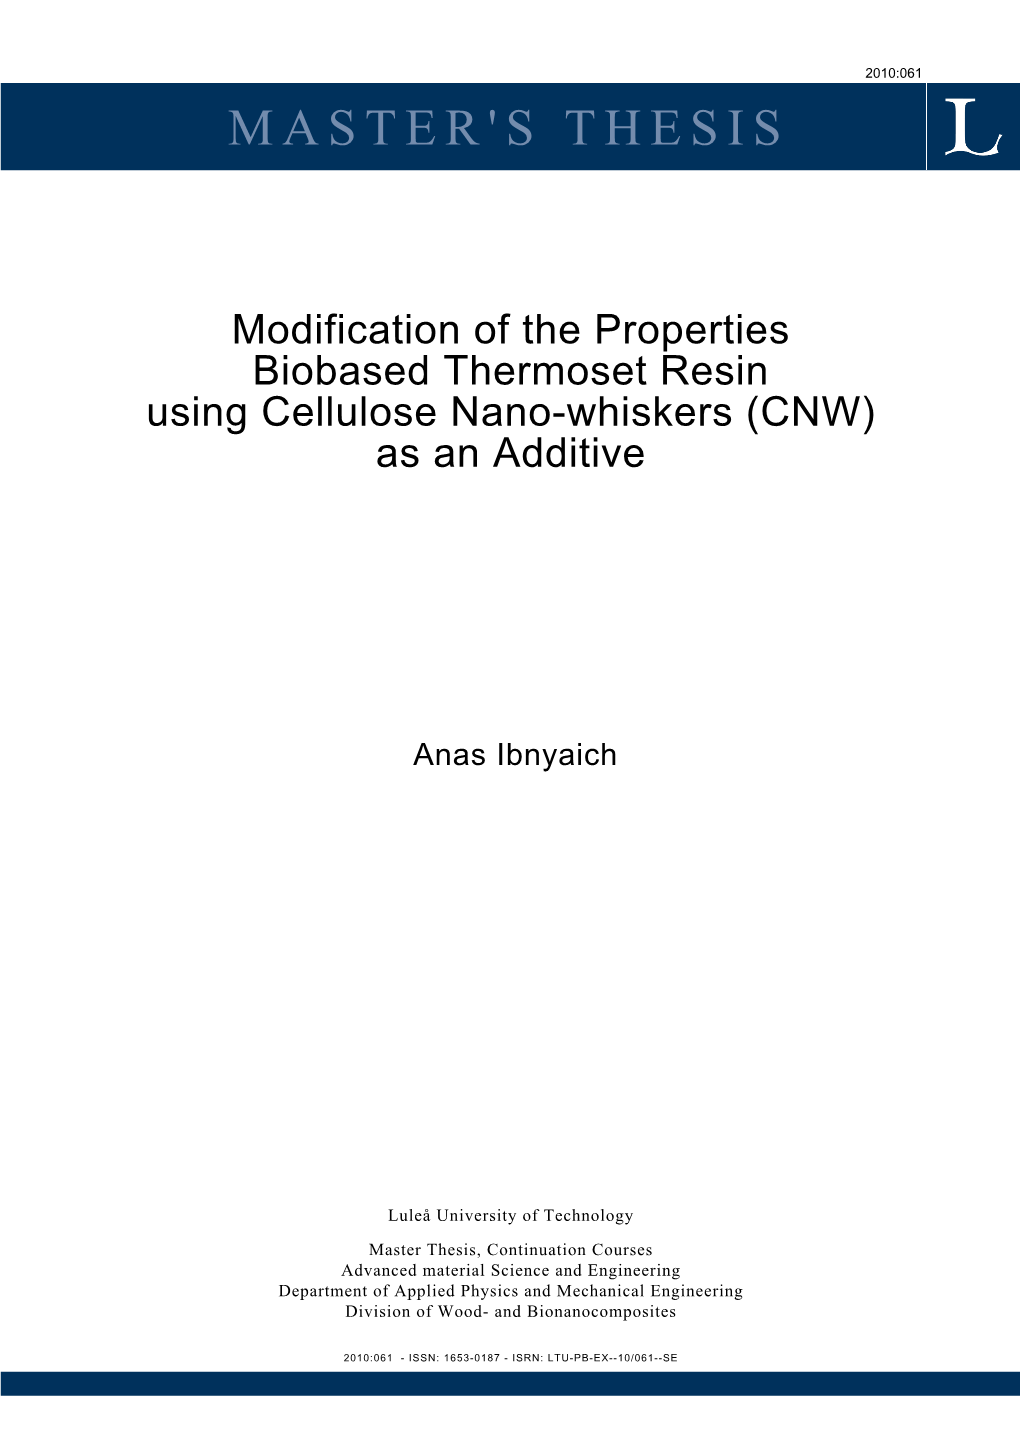 Modification of the Properties Biobased Thermoset Resin Using Cellulose Nano-Whiskers (CNW) As an Additive